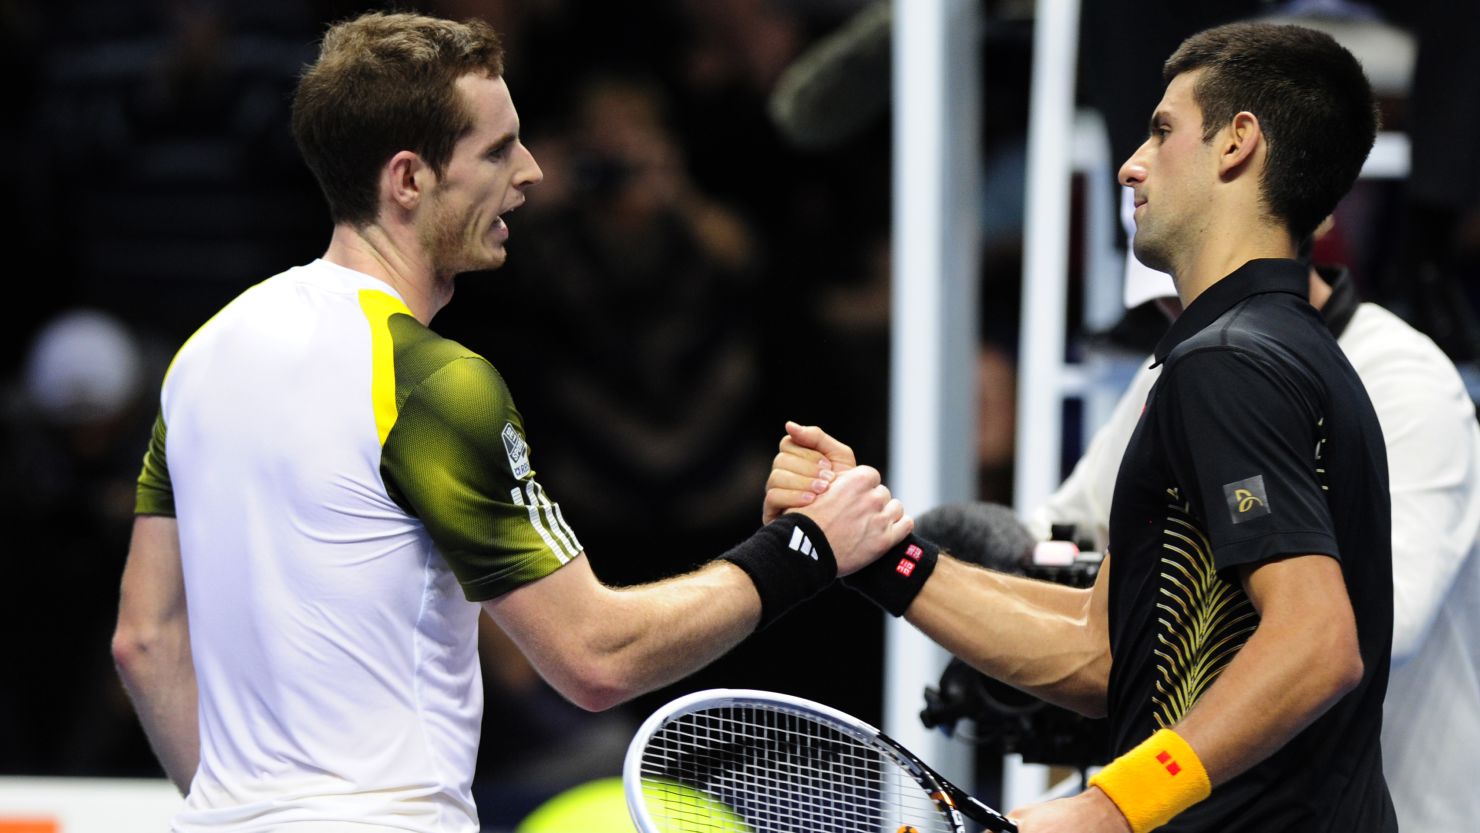 Andy Murray, left, congratulates Novak Djokovic after Djokovic the Serbian won their Group A  match on day three of the ATP World Tour Finals in London.